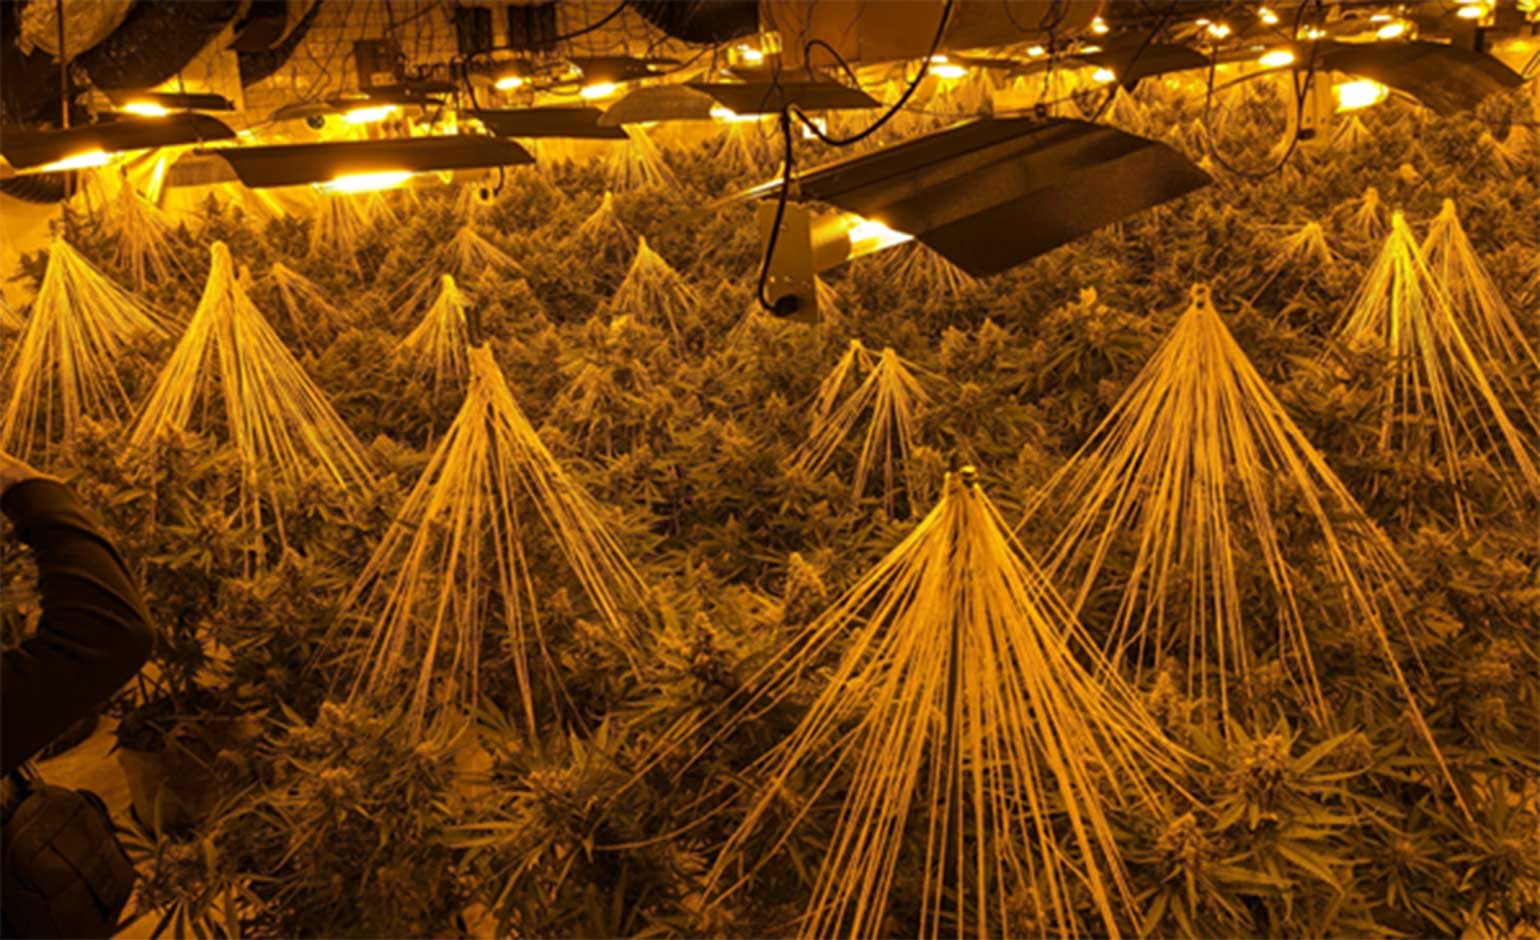 'Sophisticated’ cannabis factory discovered in abandoned building